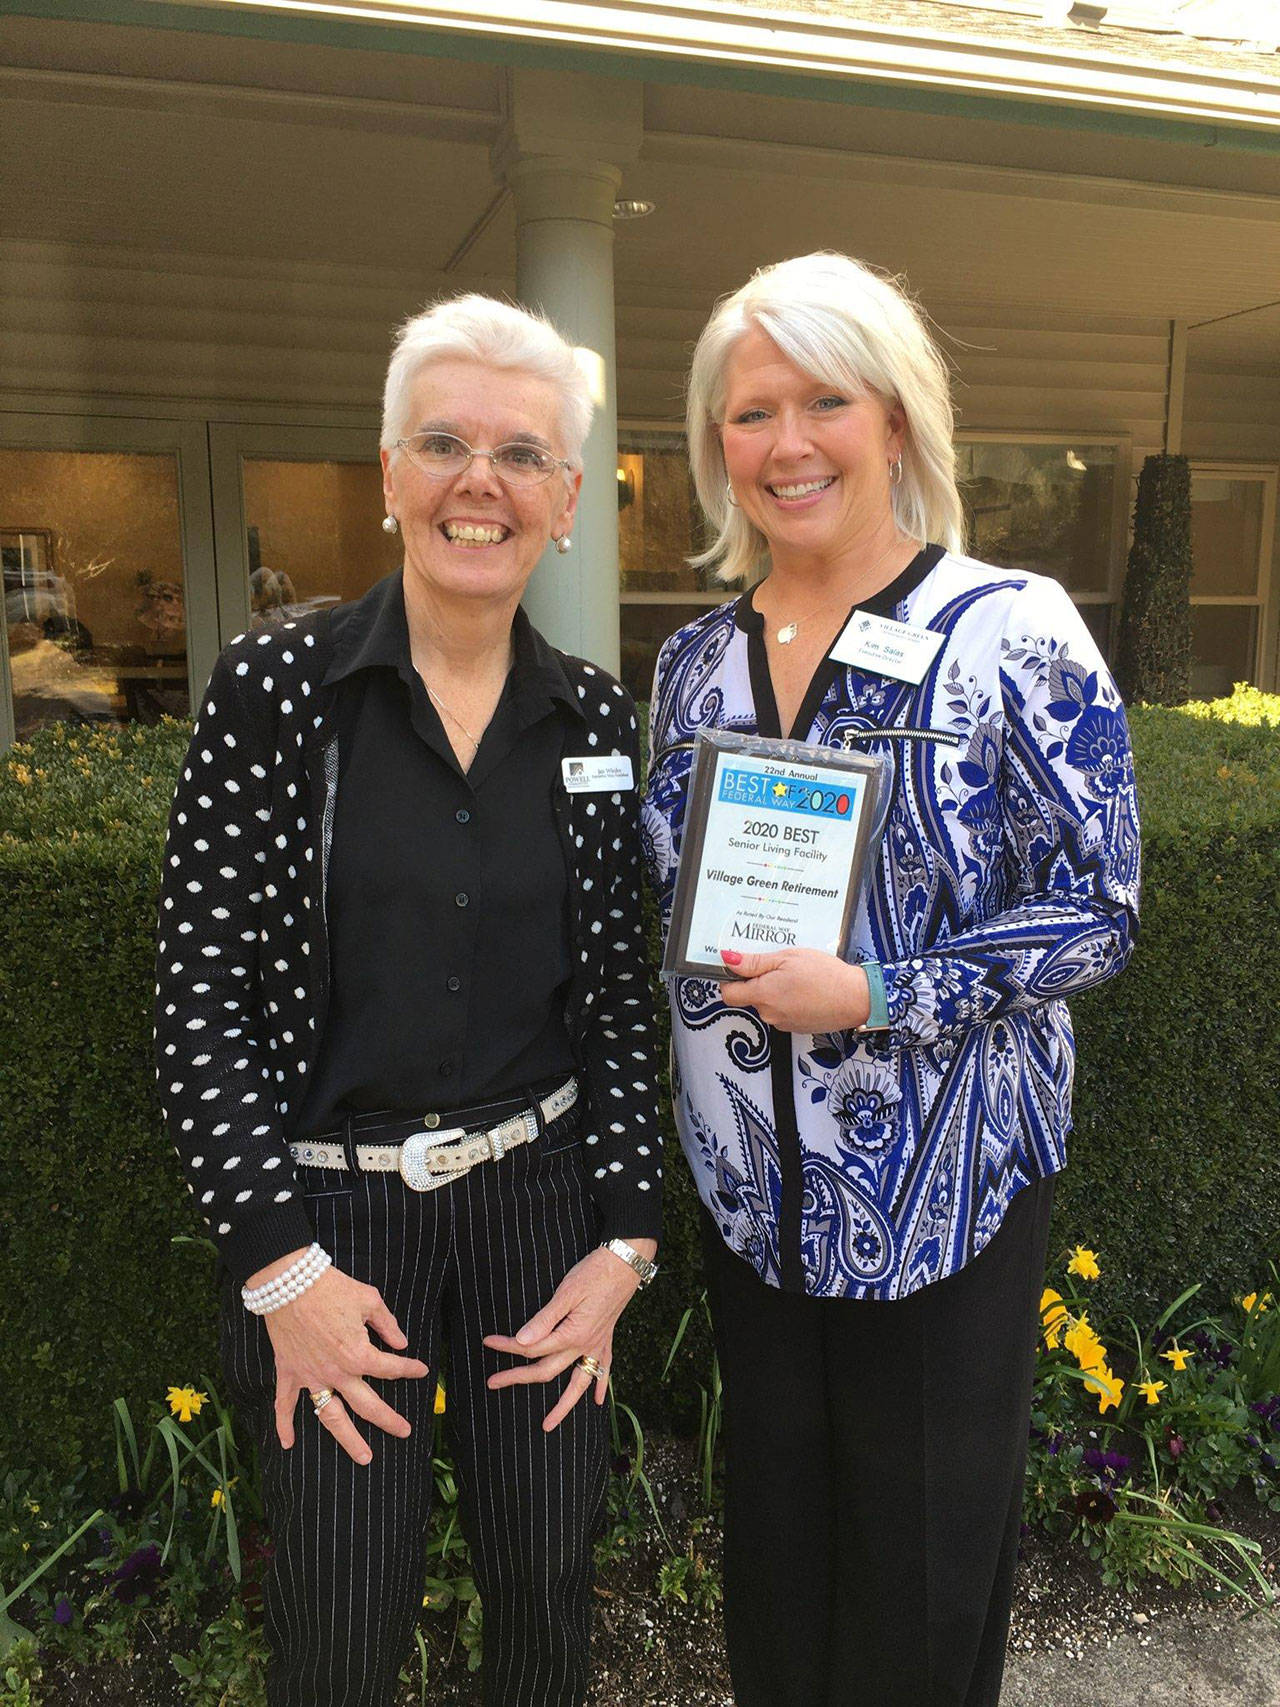 Village Green Retirement place first for Best Senior Living Facility. Cindy Ducich/staff photo